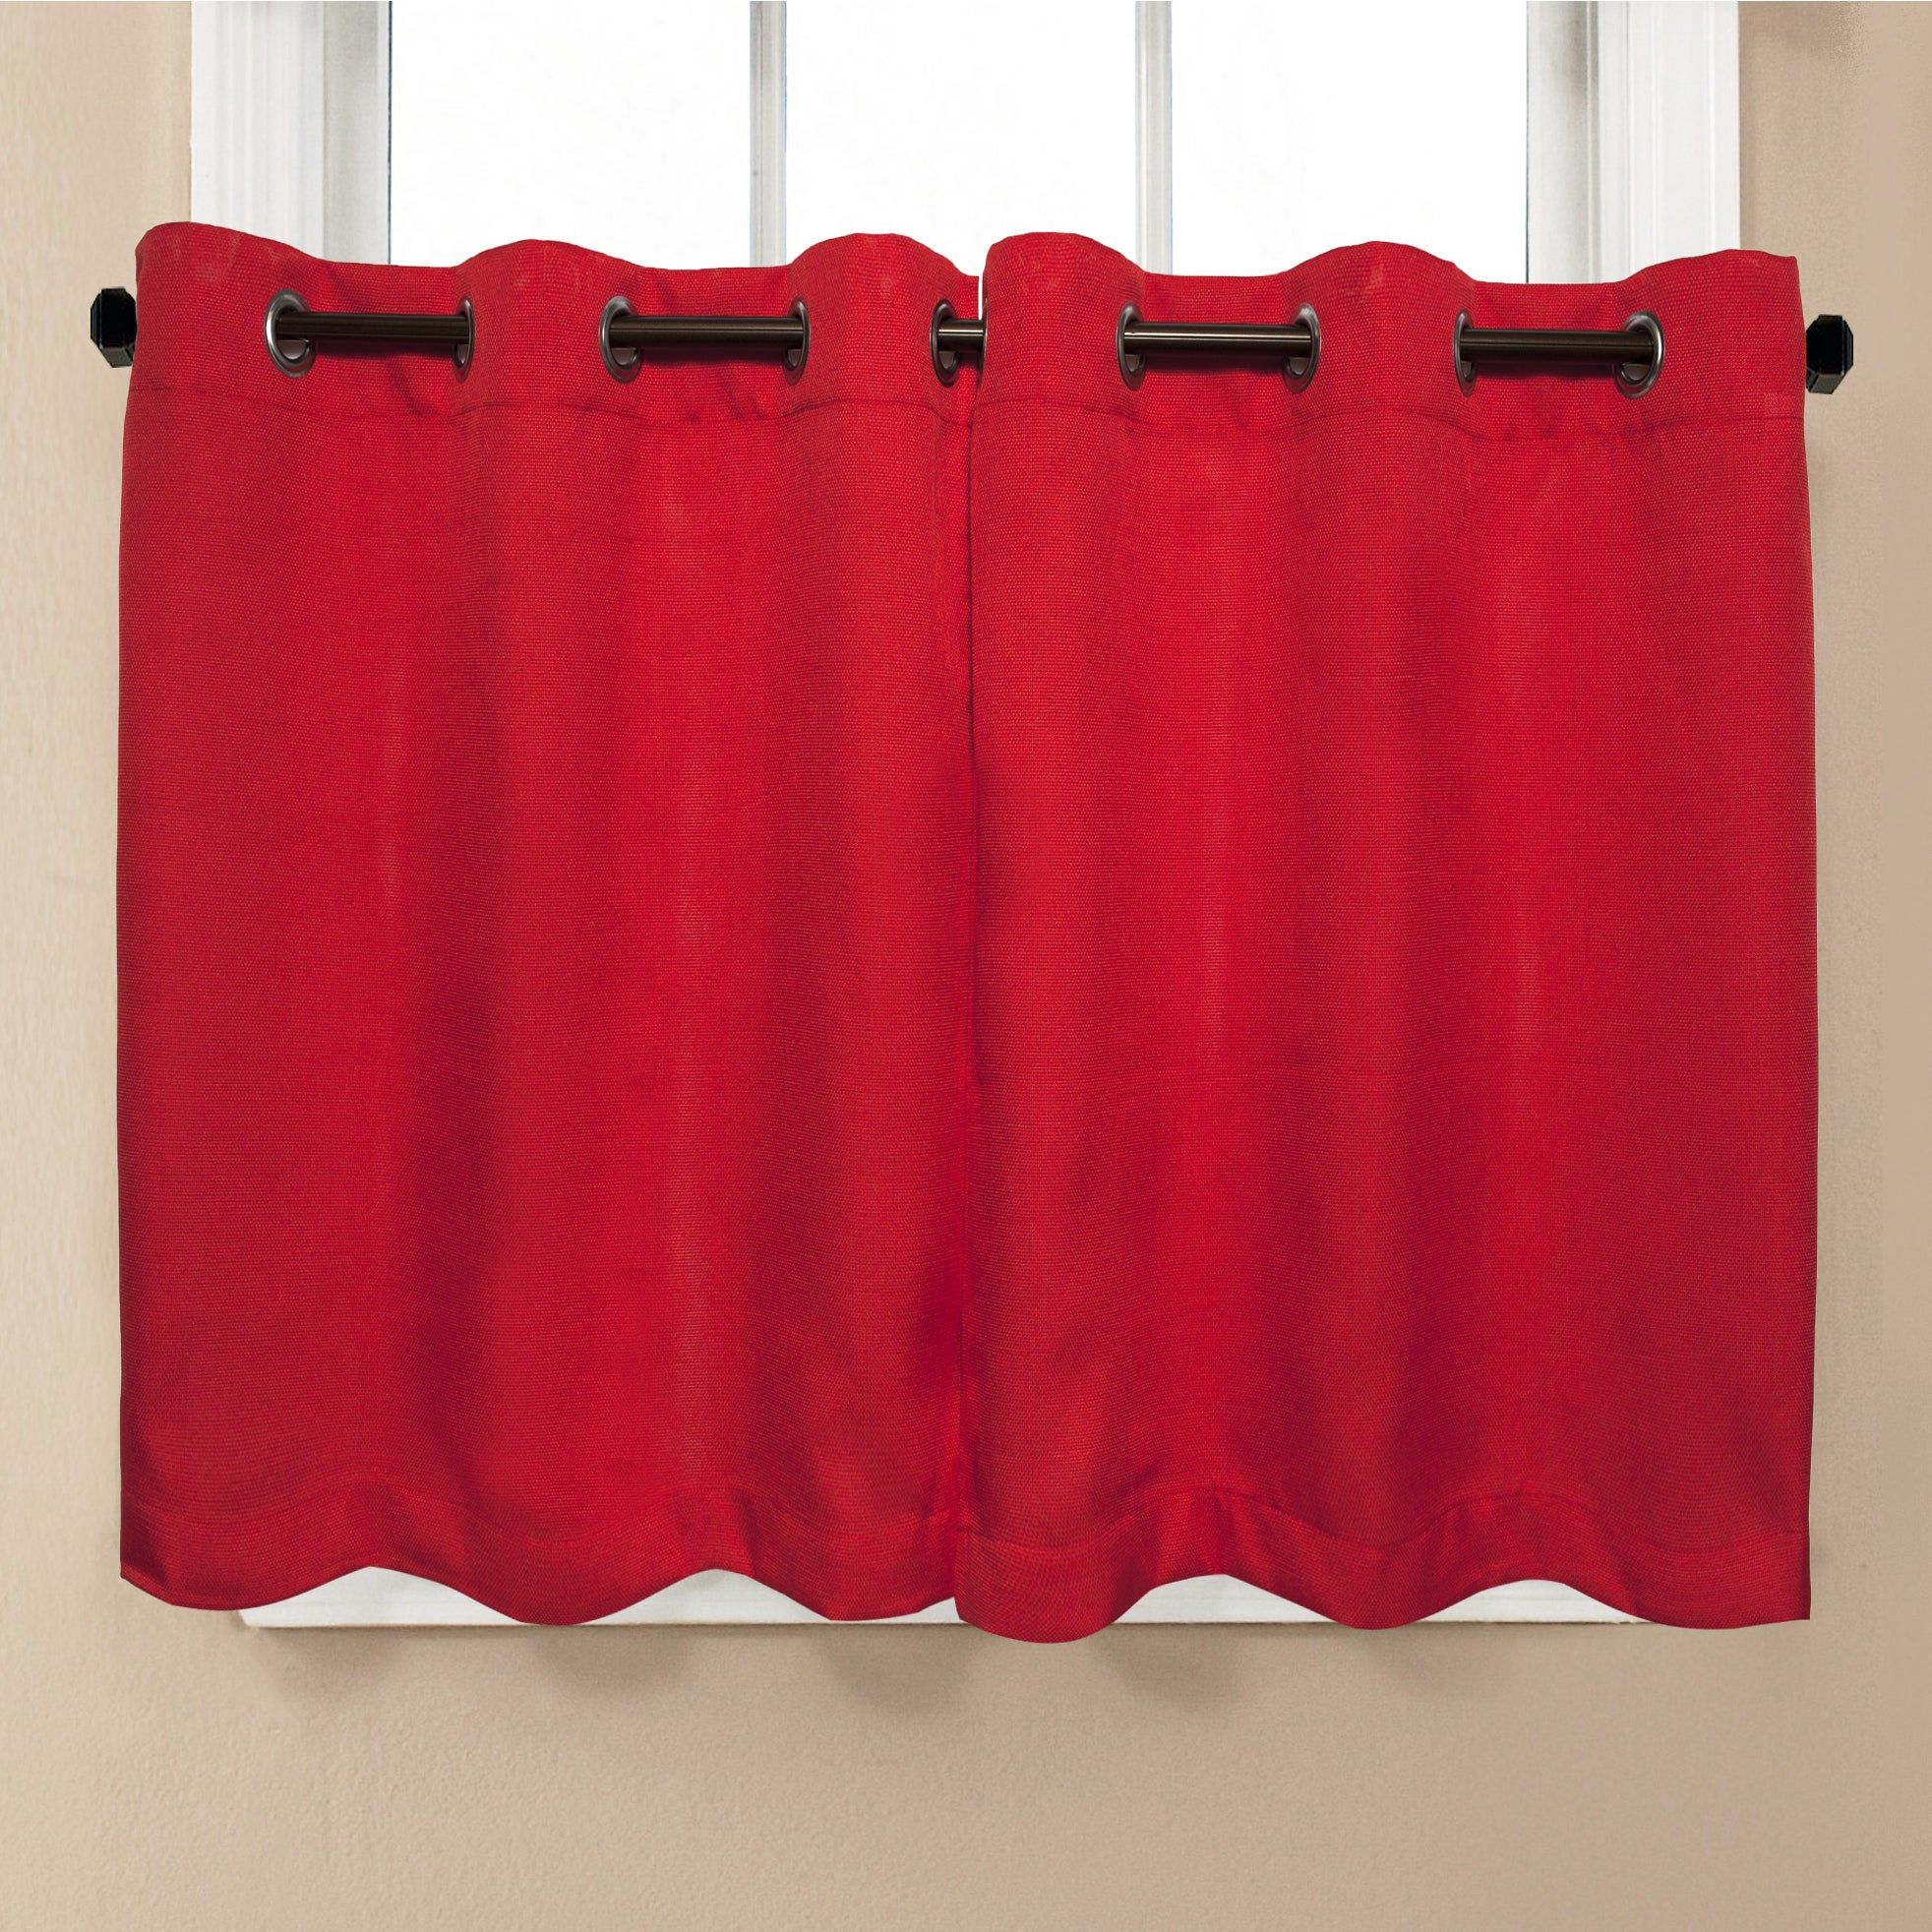 Modern Subtle Texture Solid Red Kitchen Curtain Parts With Grommets  Tier  And Valance Options Pertaining To Modern Subtle Texture Solid Red Kitchen Curtains (Photo 2 of 20)